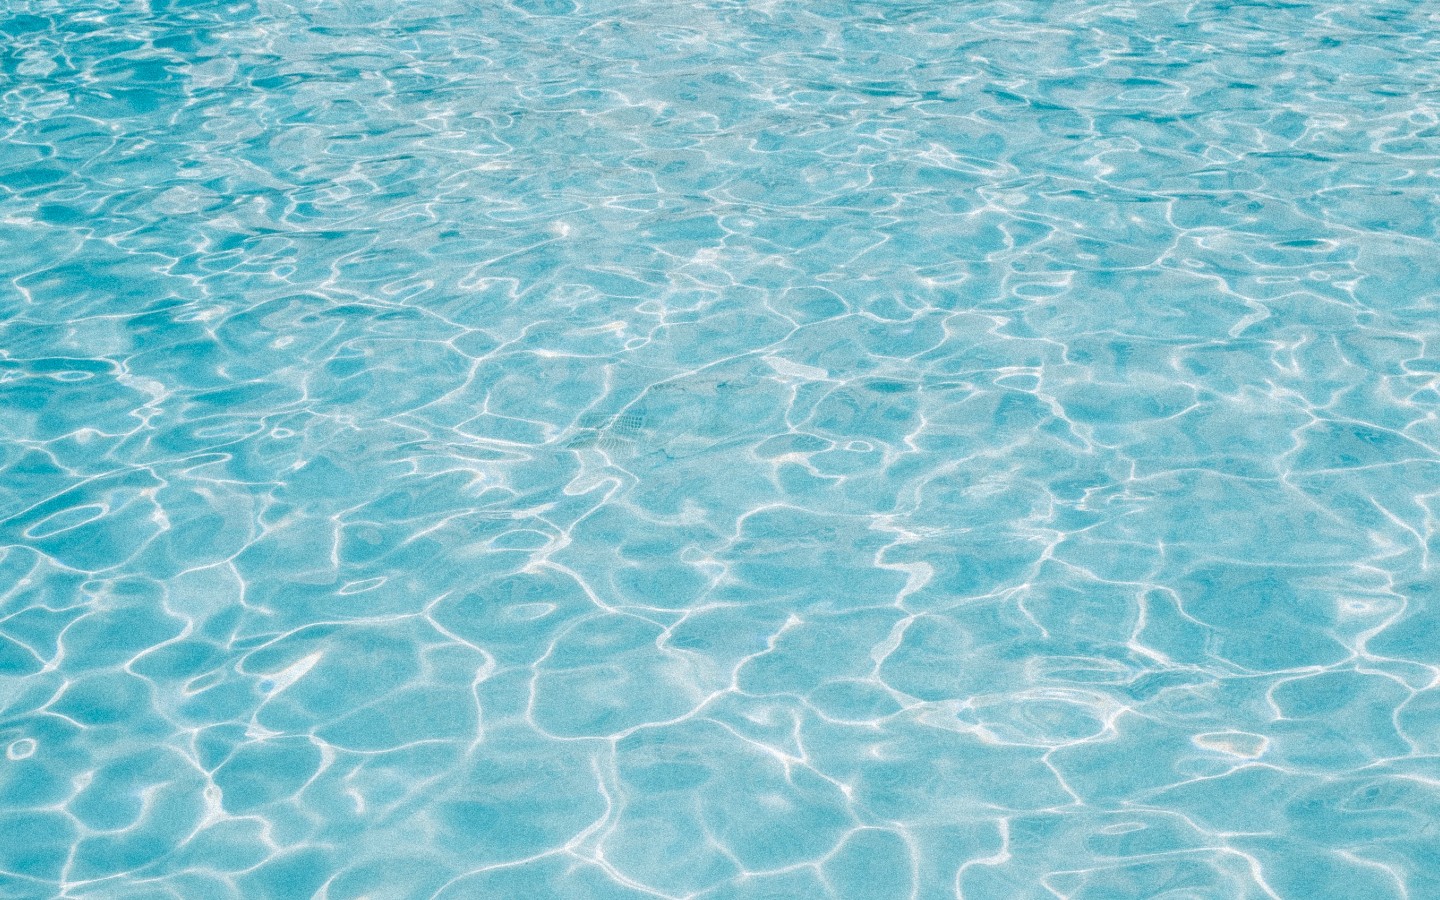 A close-up shot of crystal clear water